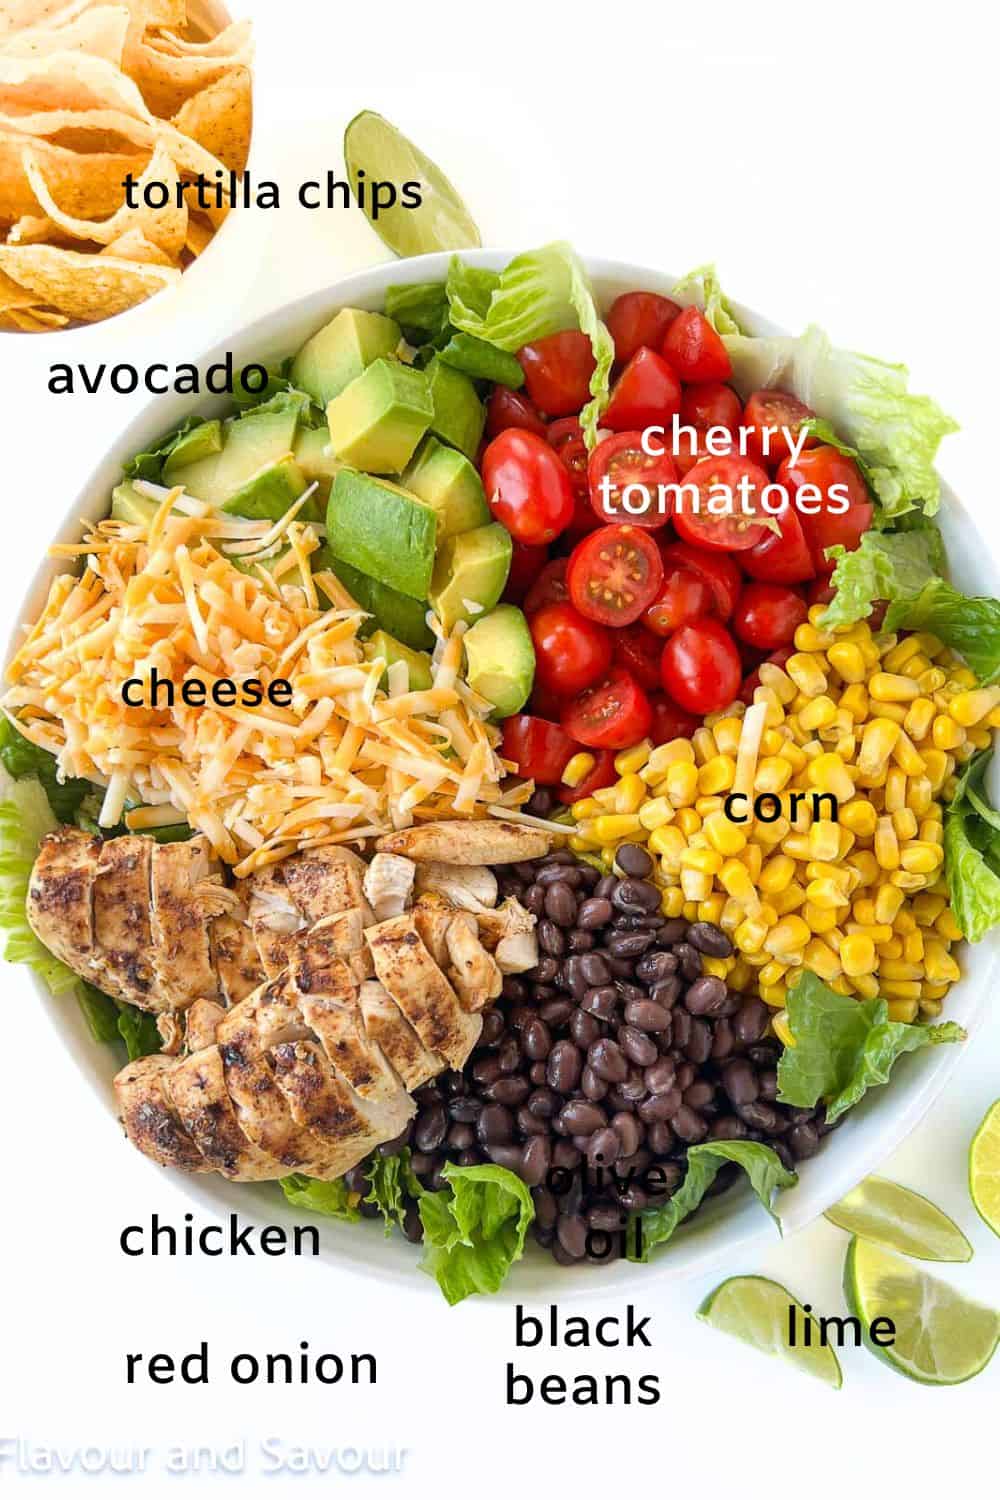 Ingredients for chicken tacos salad arranged in sections on a bed of romaine.